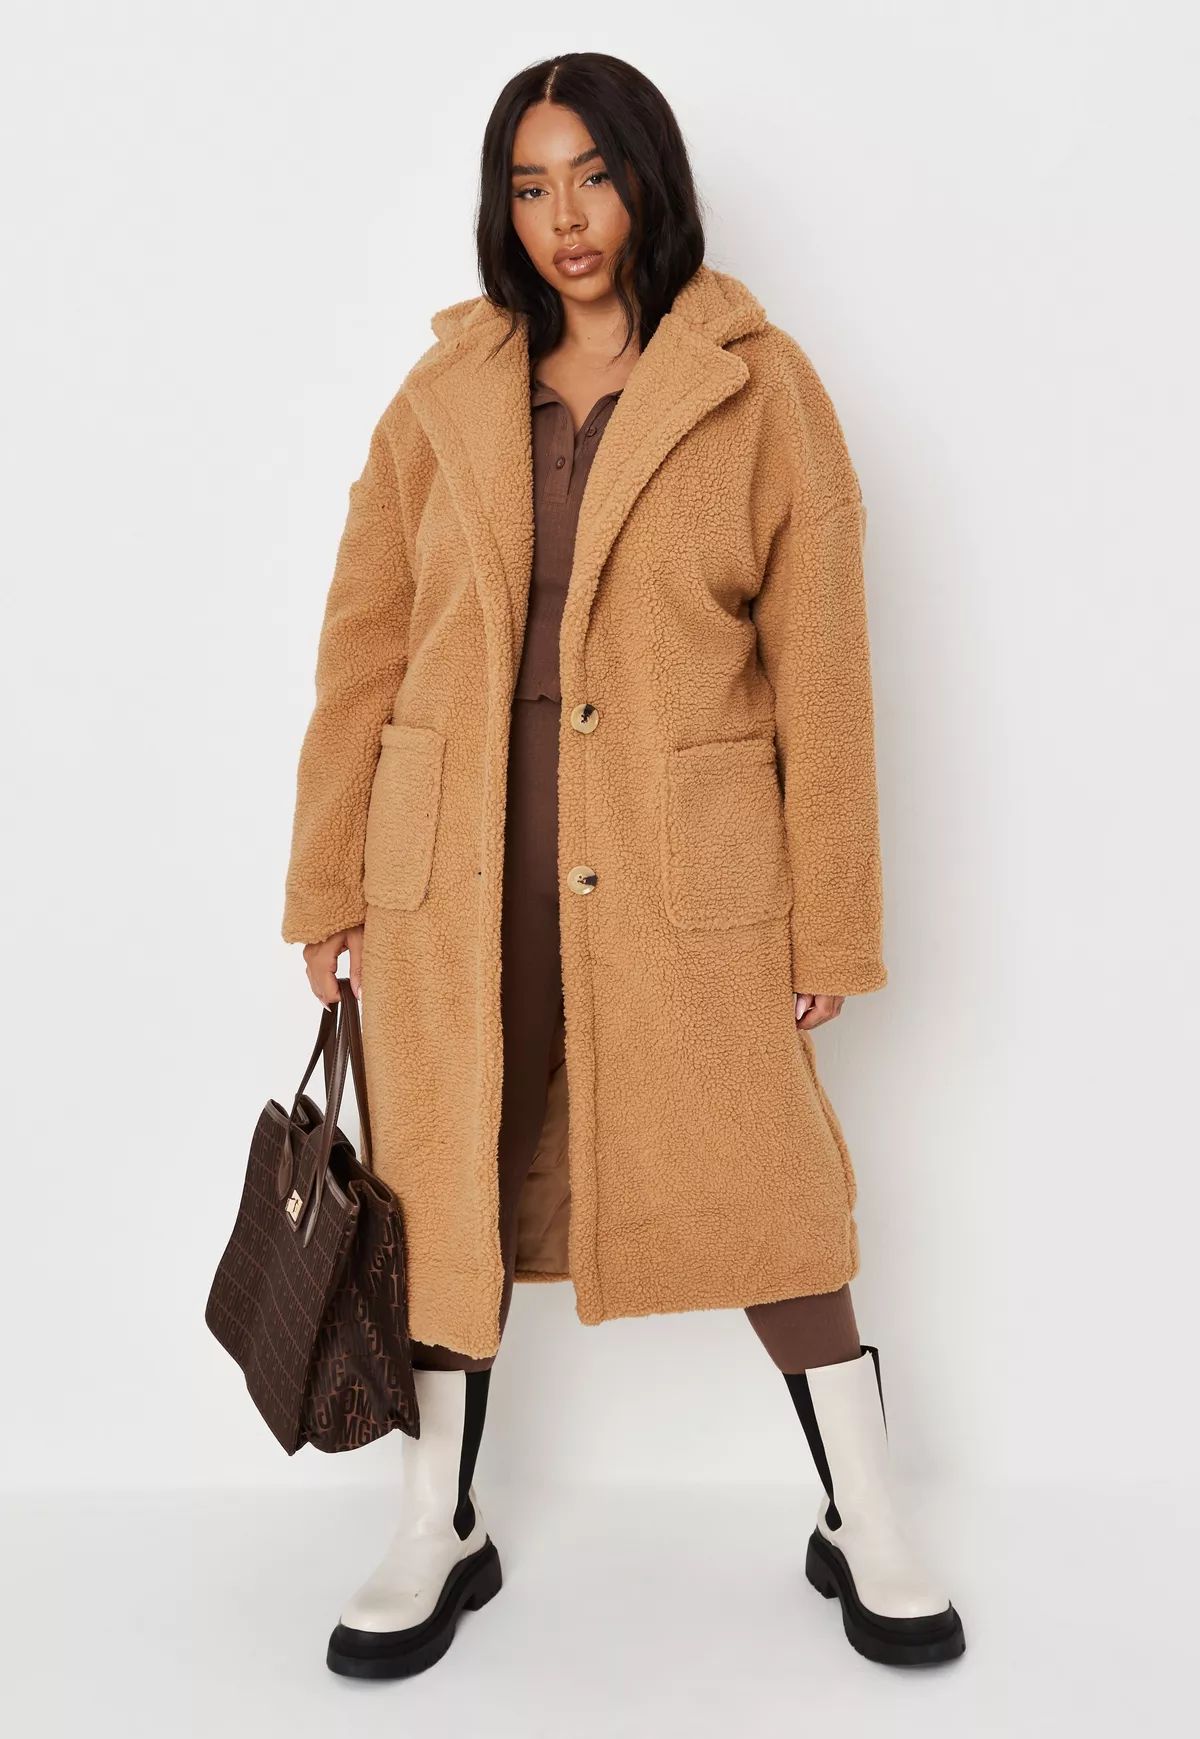 Missguided - Plus Size Tan Borg Teddy Long Oversized Coat | Missguided (US & CA)